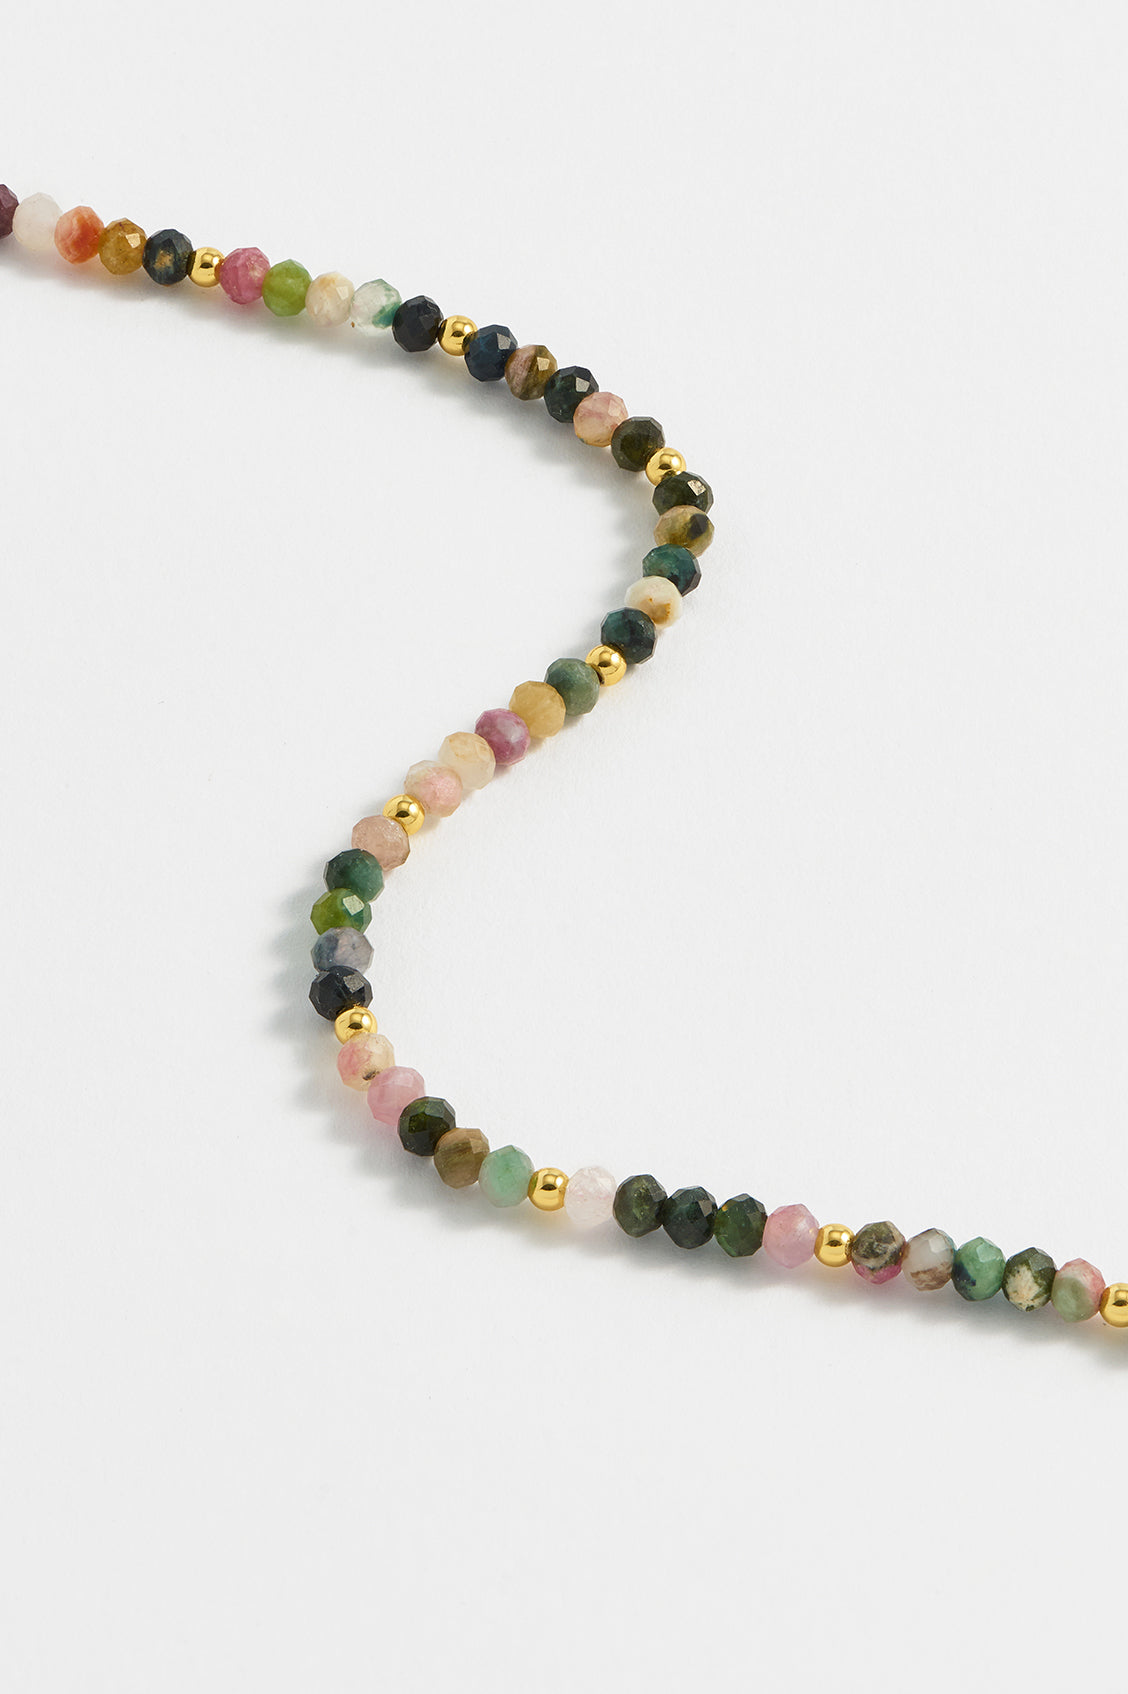 Men's Pearl Choker with Playful Glass Beads